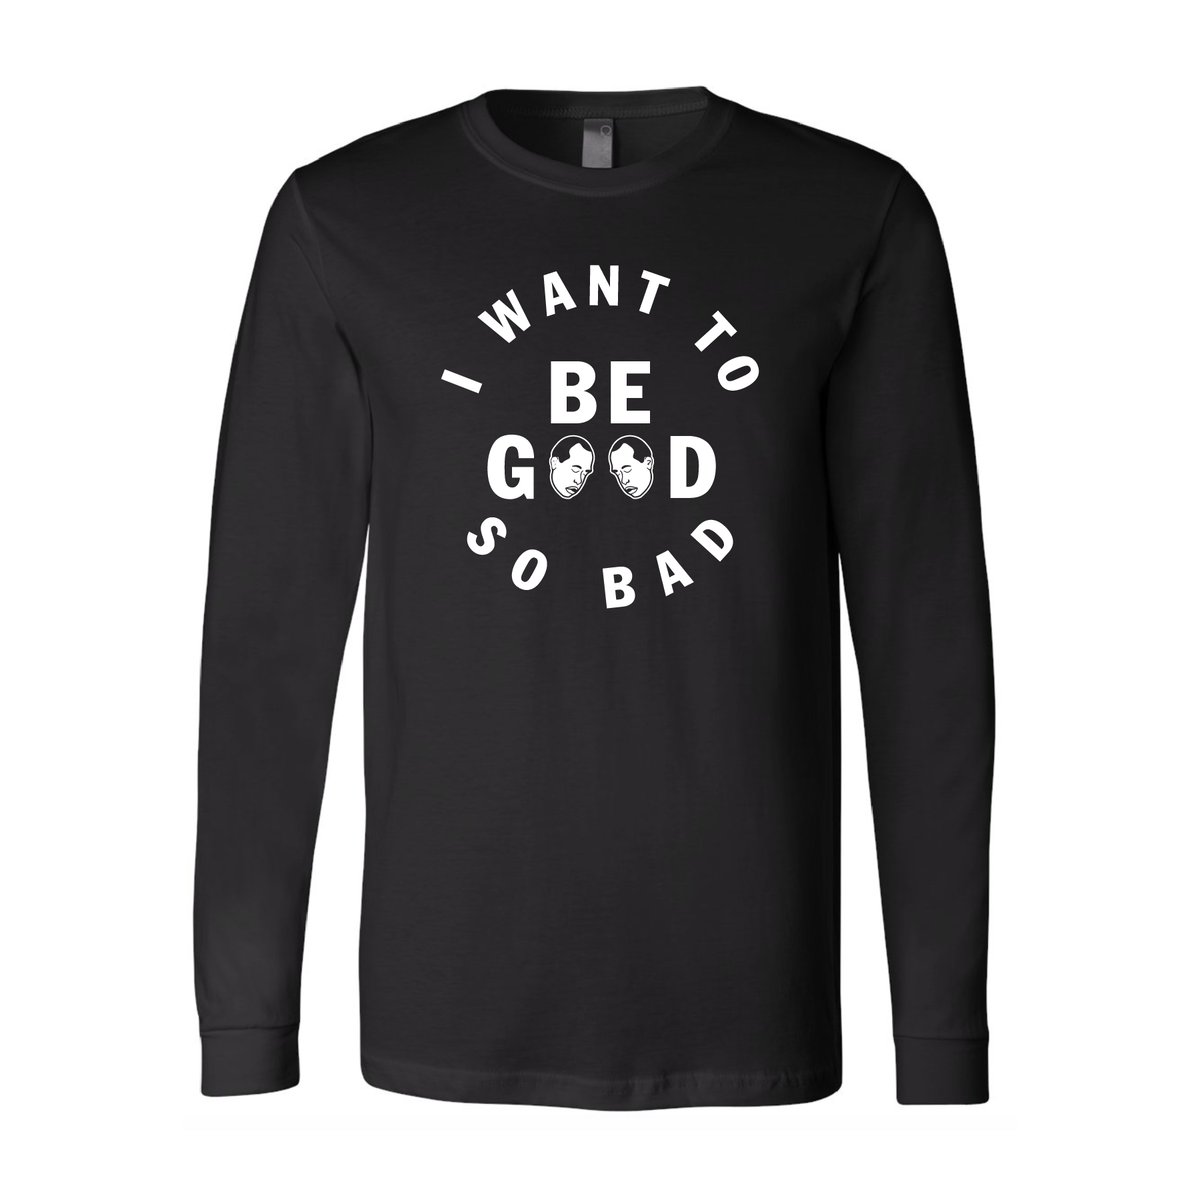 I WANT TO BE GOOD SO BAD UNISEX LONG SLEEVE T SHIRT | dopeypodcastmerch